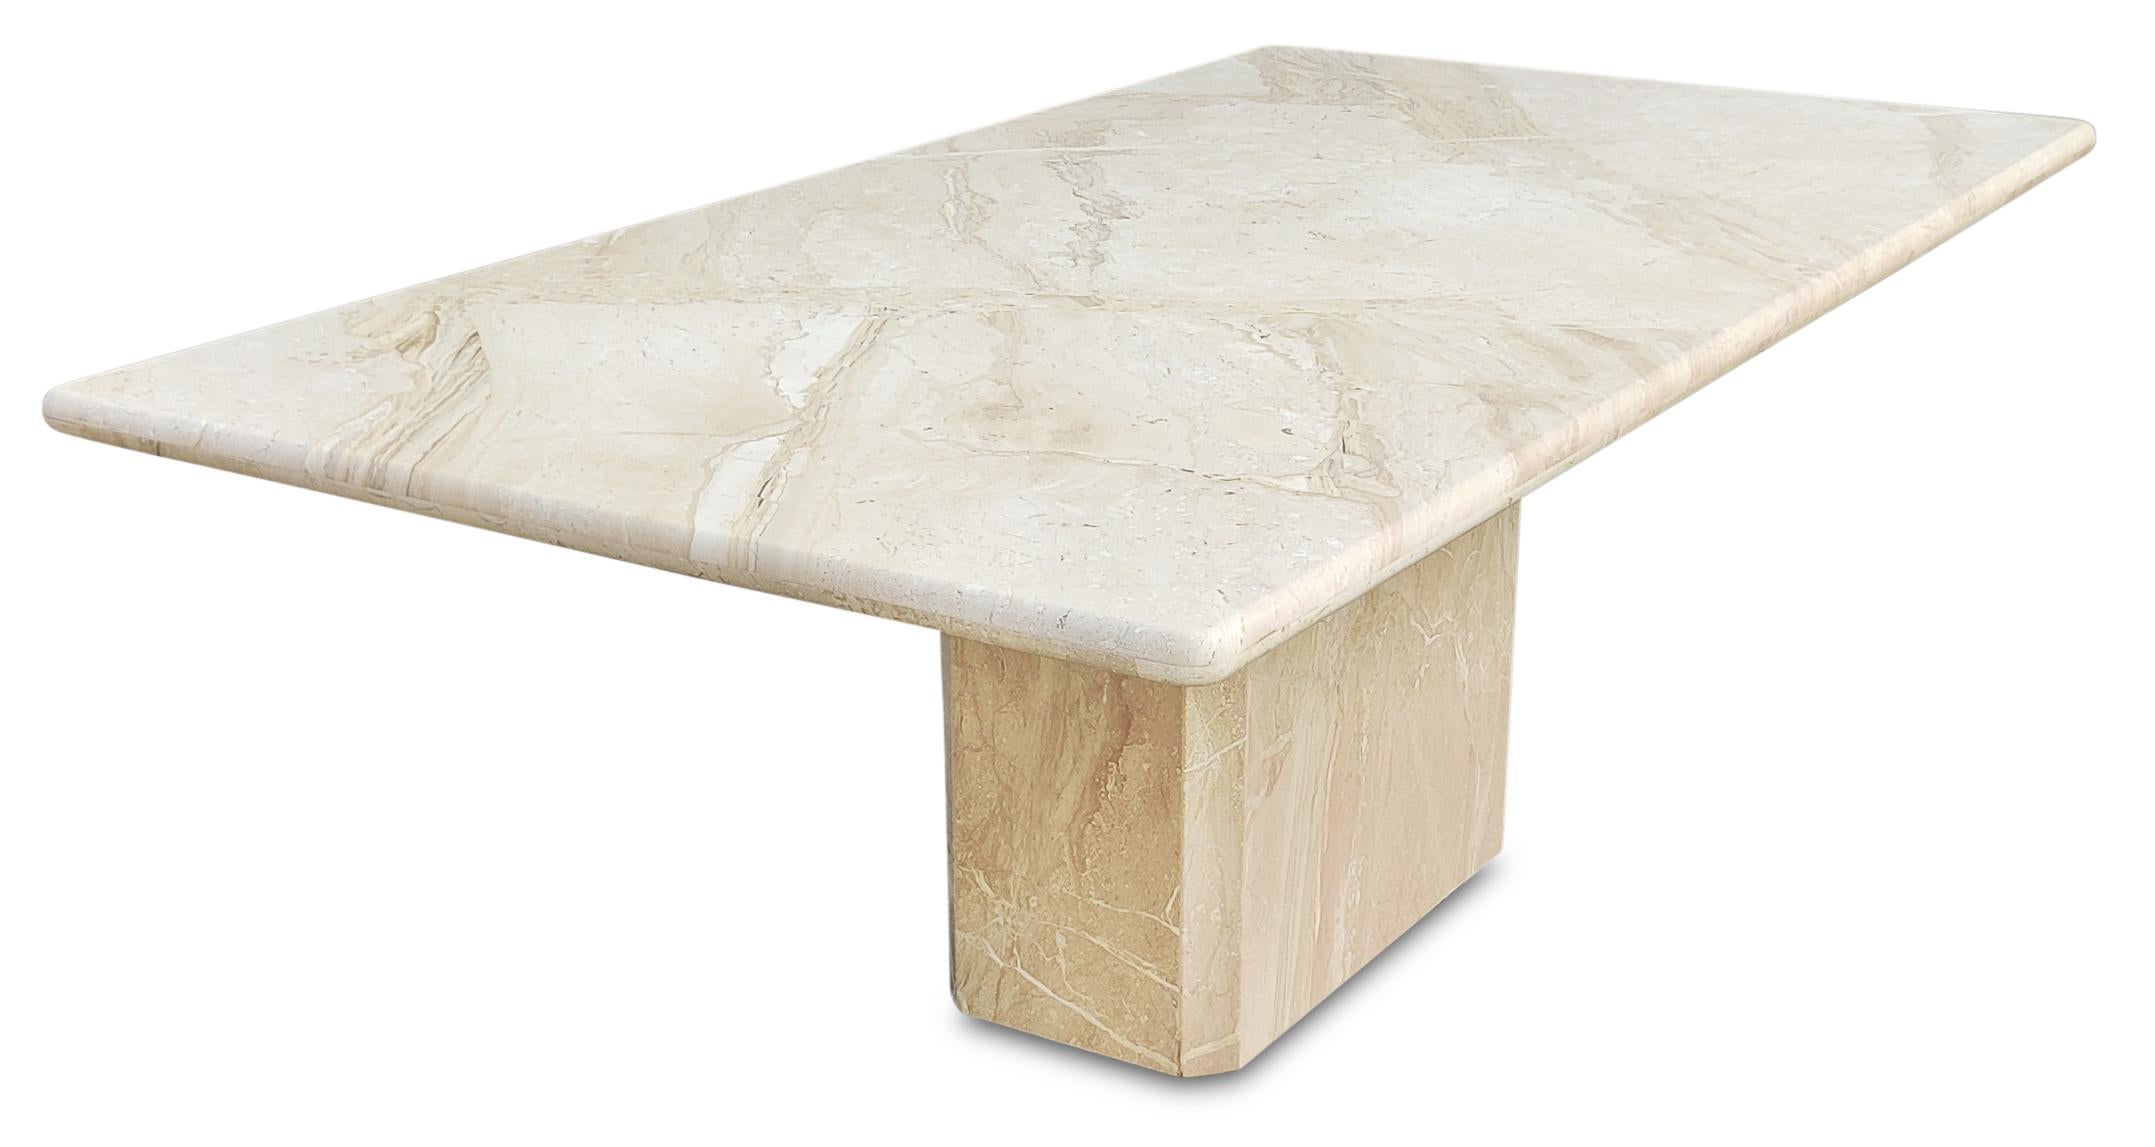 Late 20th Century Italian Post-Modern Polished Beige or Cream Large Marble Pedestal Dining Table